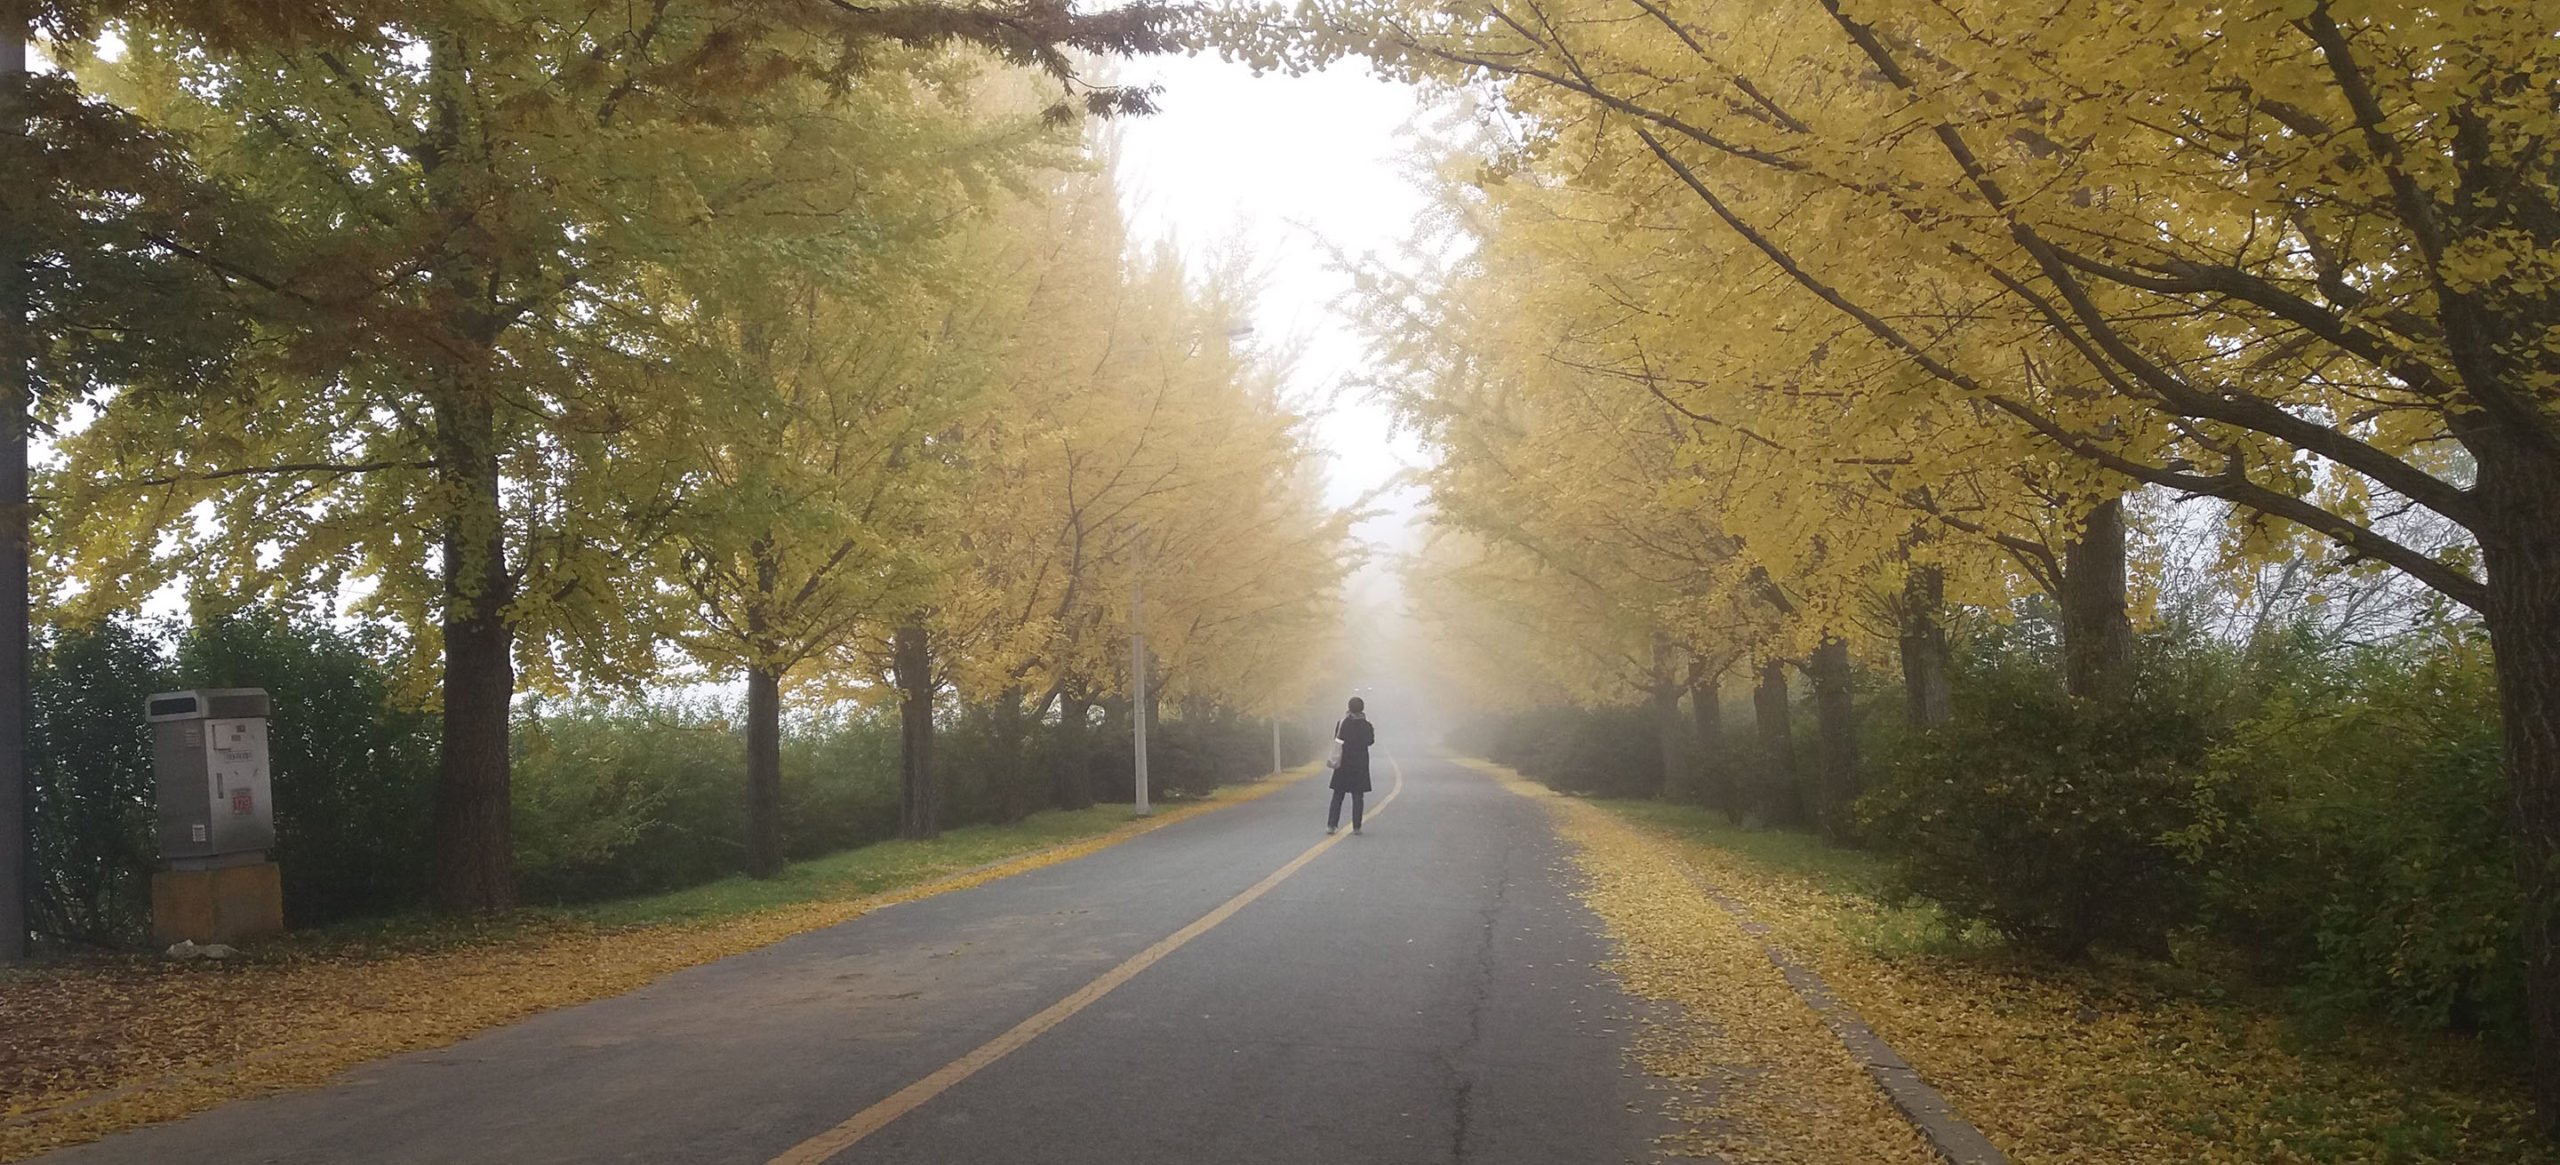 ginko trees with fog and a stranger